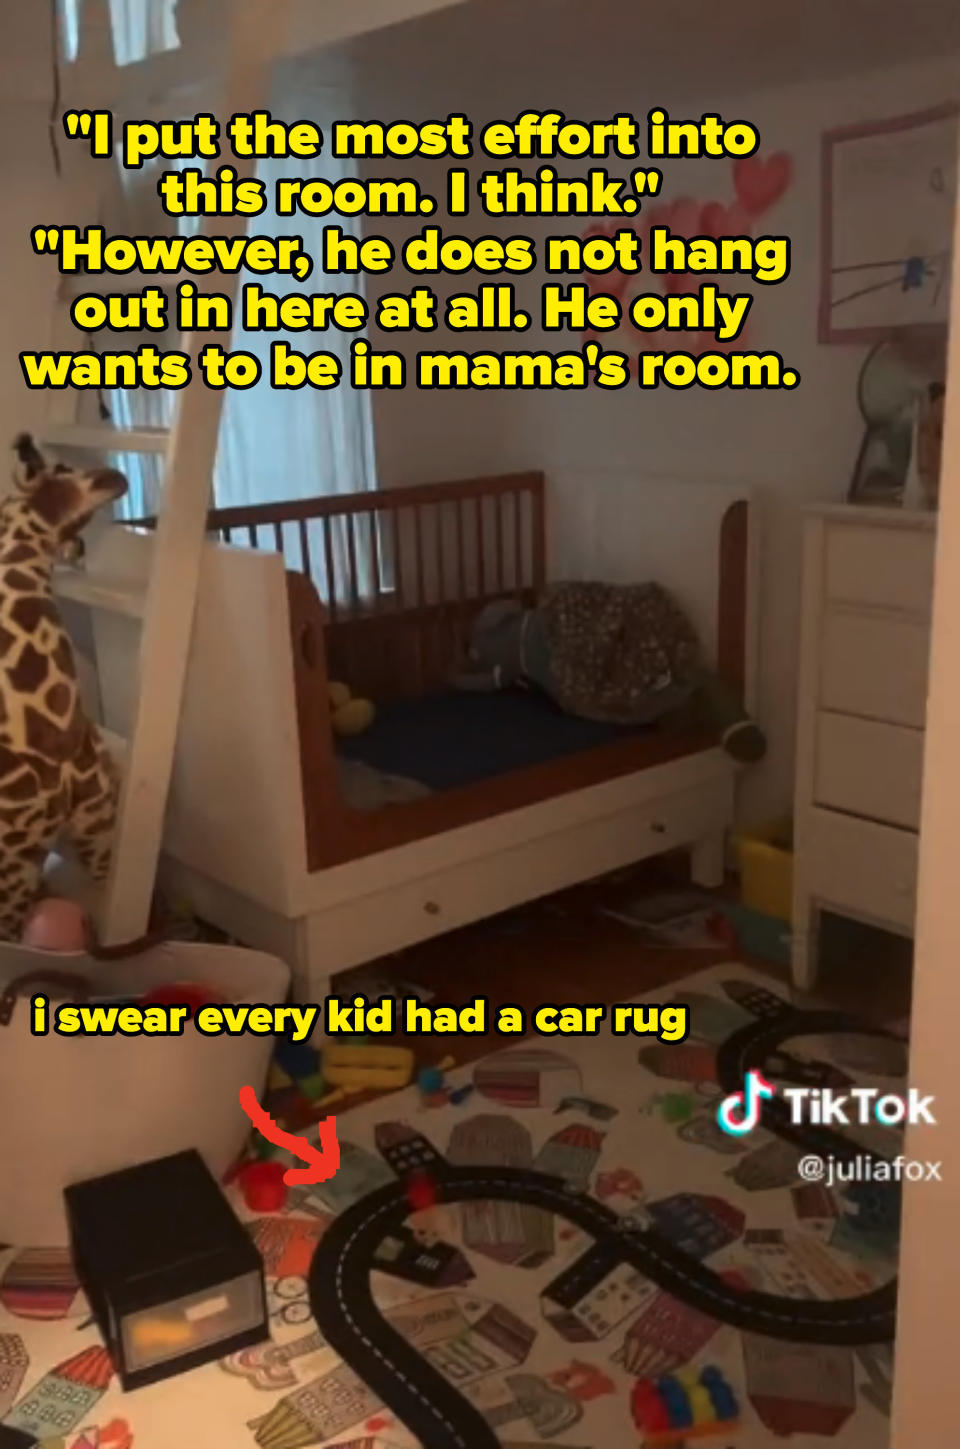 Valentino's room has a bunk bed, a car rug, and a stuffed giraffe